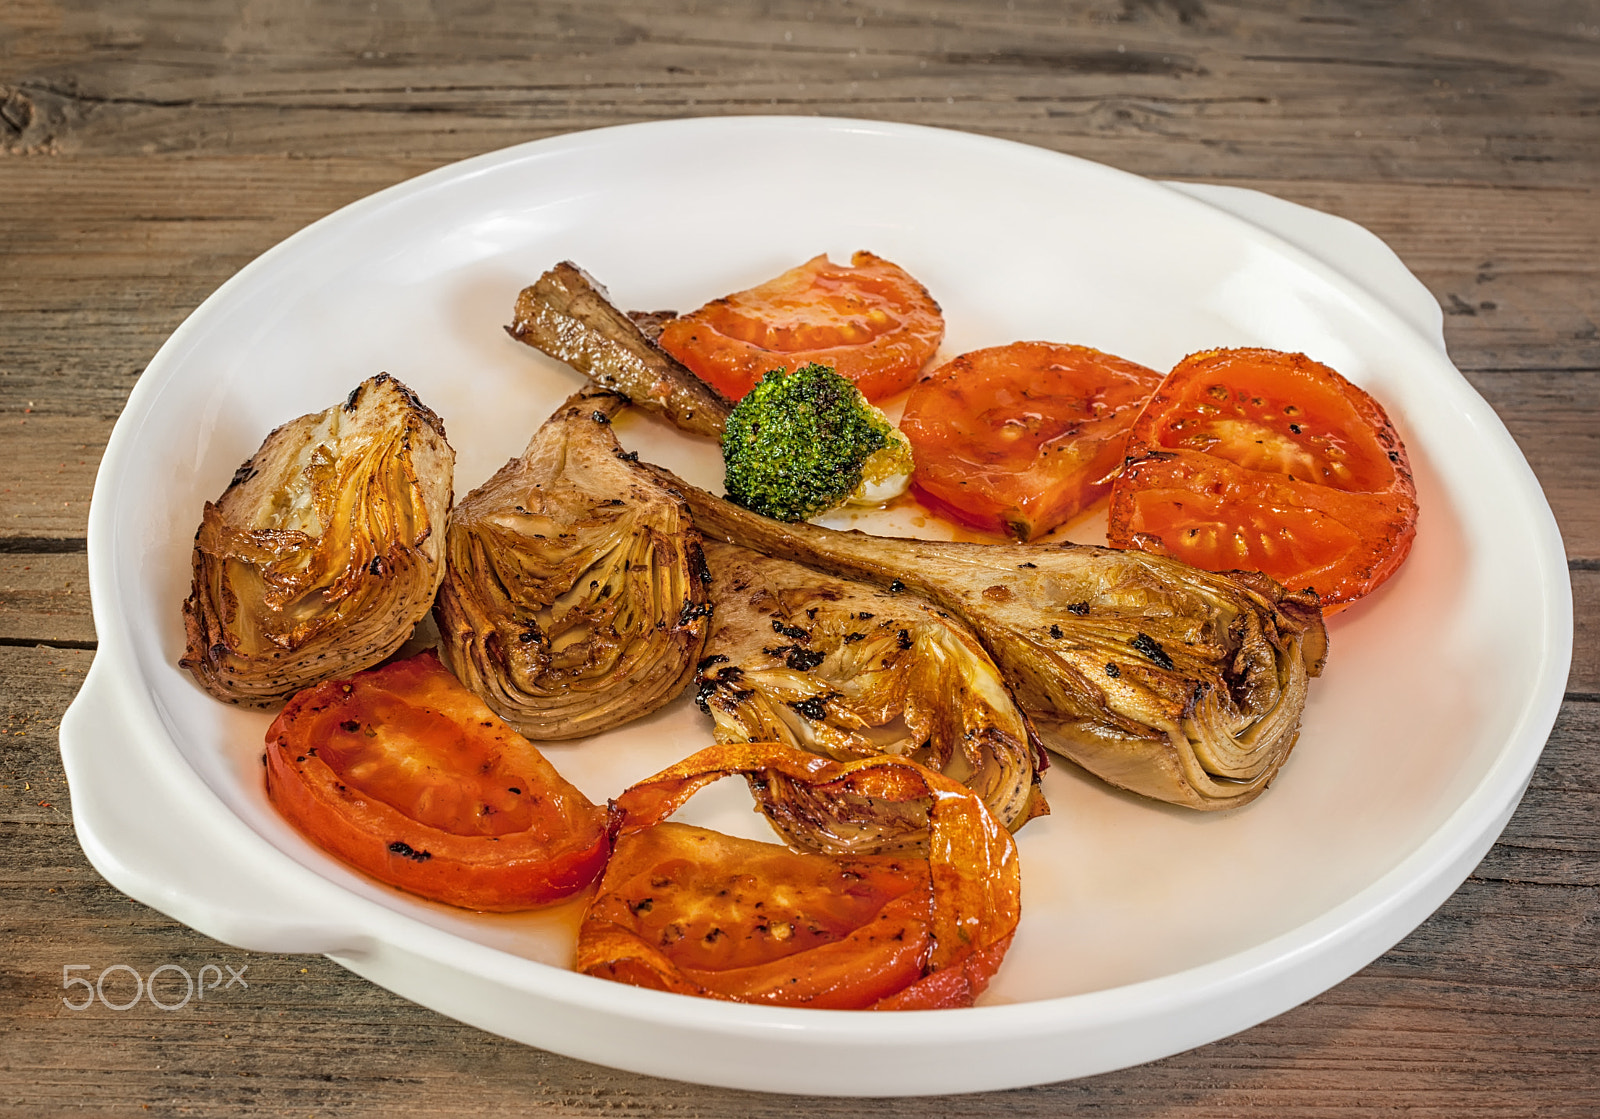 Nikon D700 sample photo. Artichoke halves grilled with slices of ripe red tomatoes on a white plate and wooden background photography